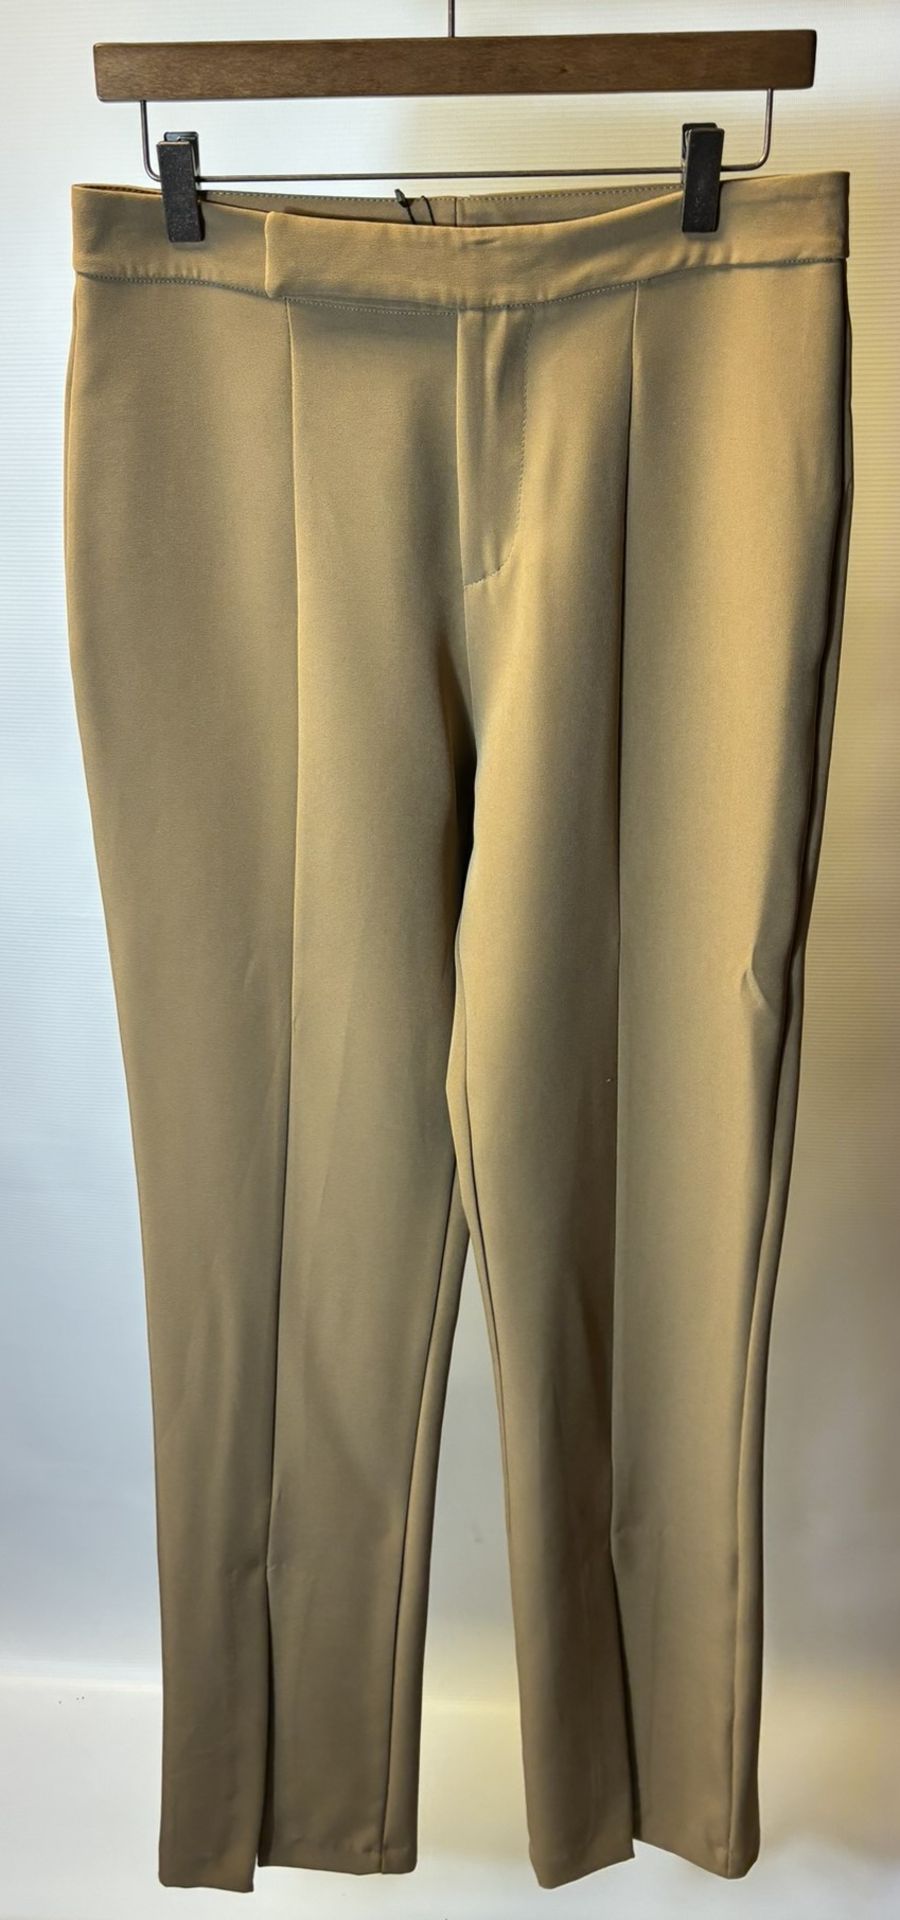 15 x Various Pairs Of Women's Trousers As Seen In Photos - Image 40 of 45